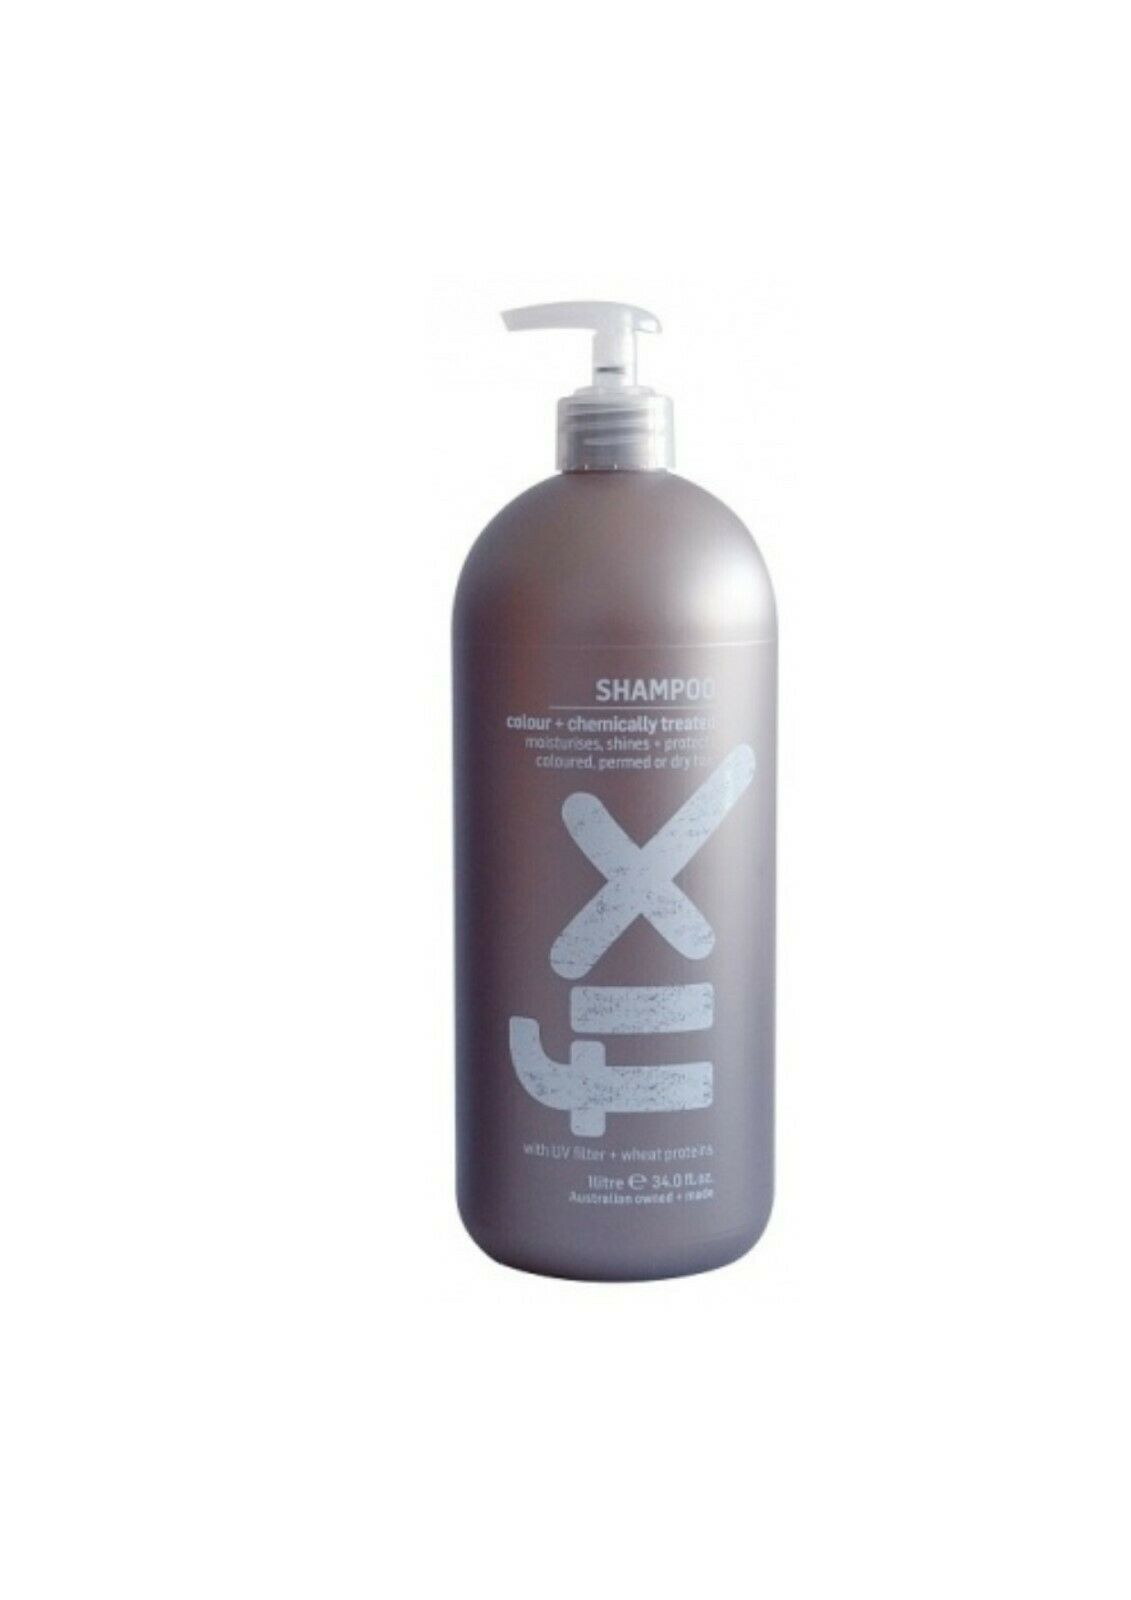 iaahhaircare,Fix By Juuce colour and chemically treated Shampoo  1lt,Shampoos & Conditioners,fix by Juuce